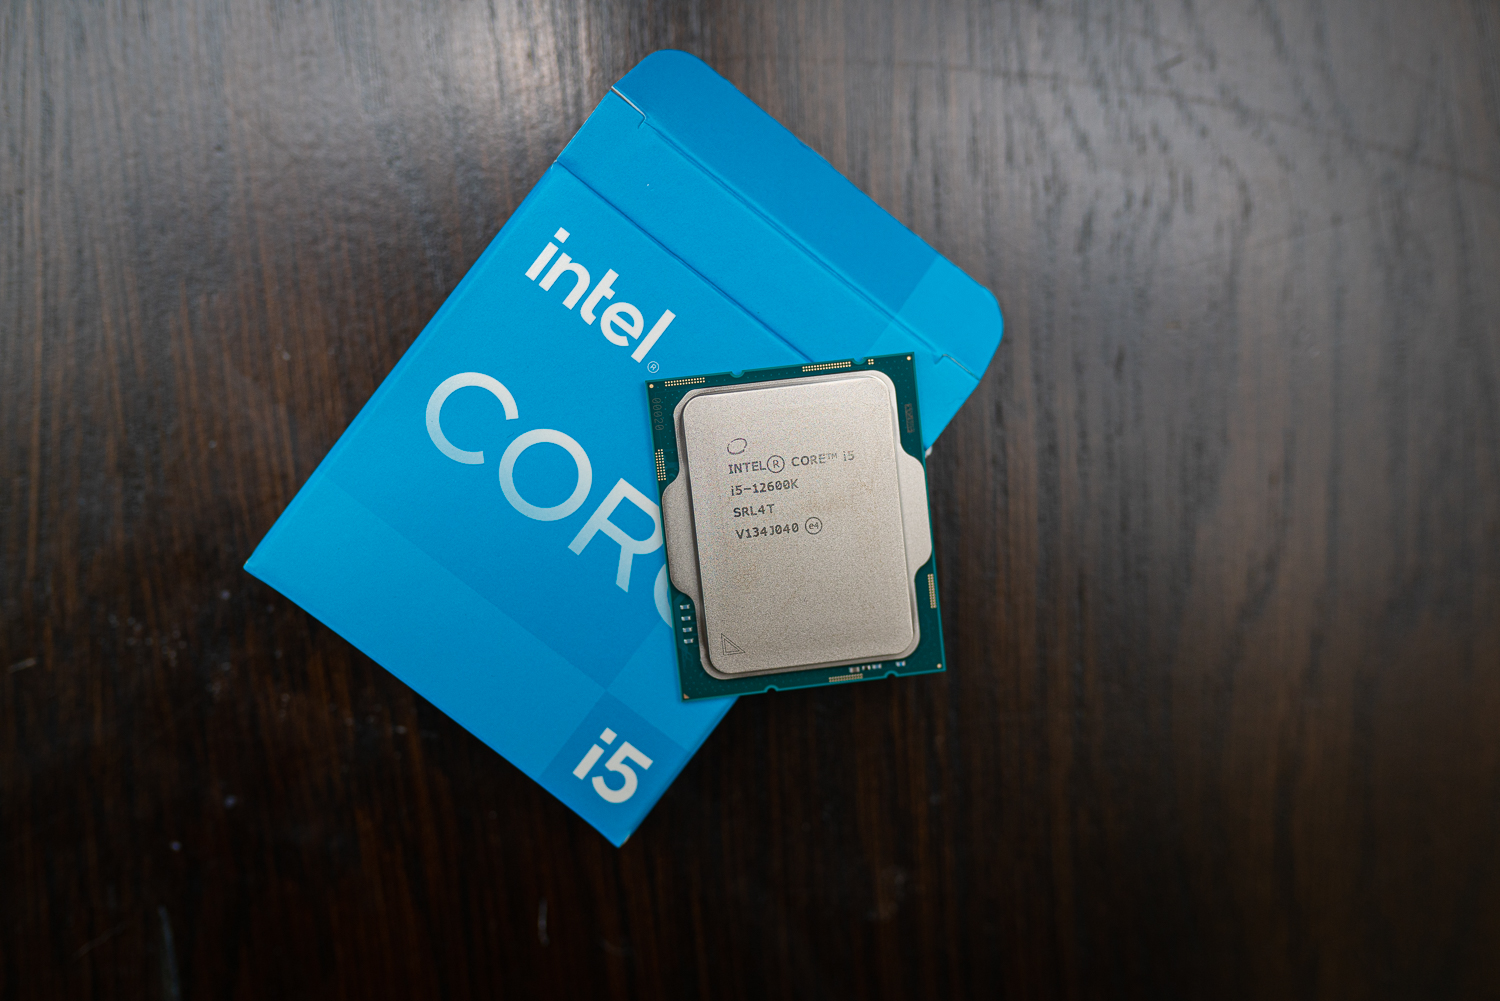 Alder Lake Intel Core i5 12600K - What Everyone Is Missing